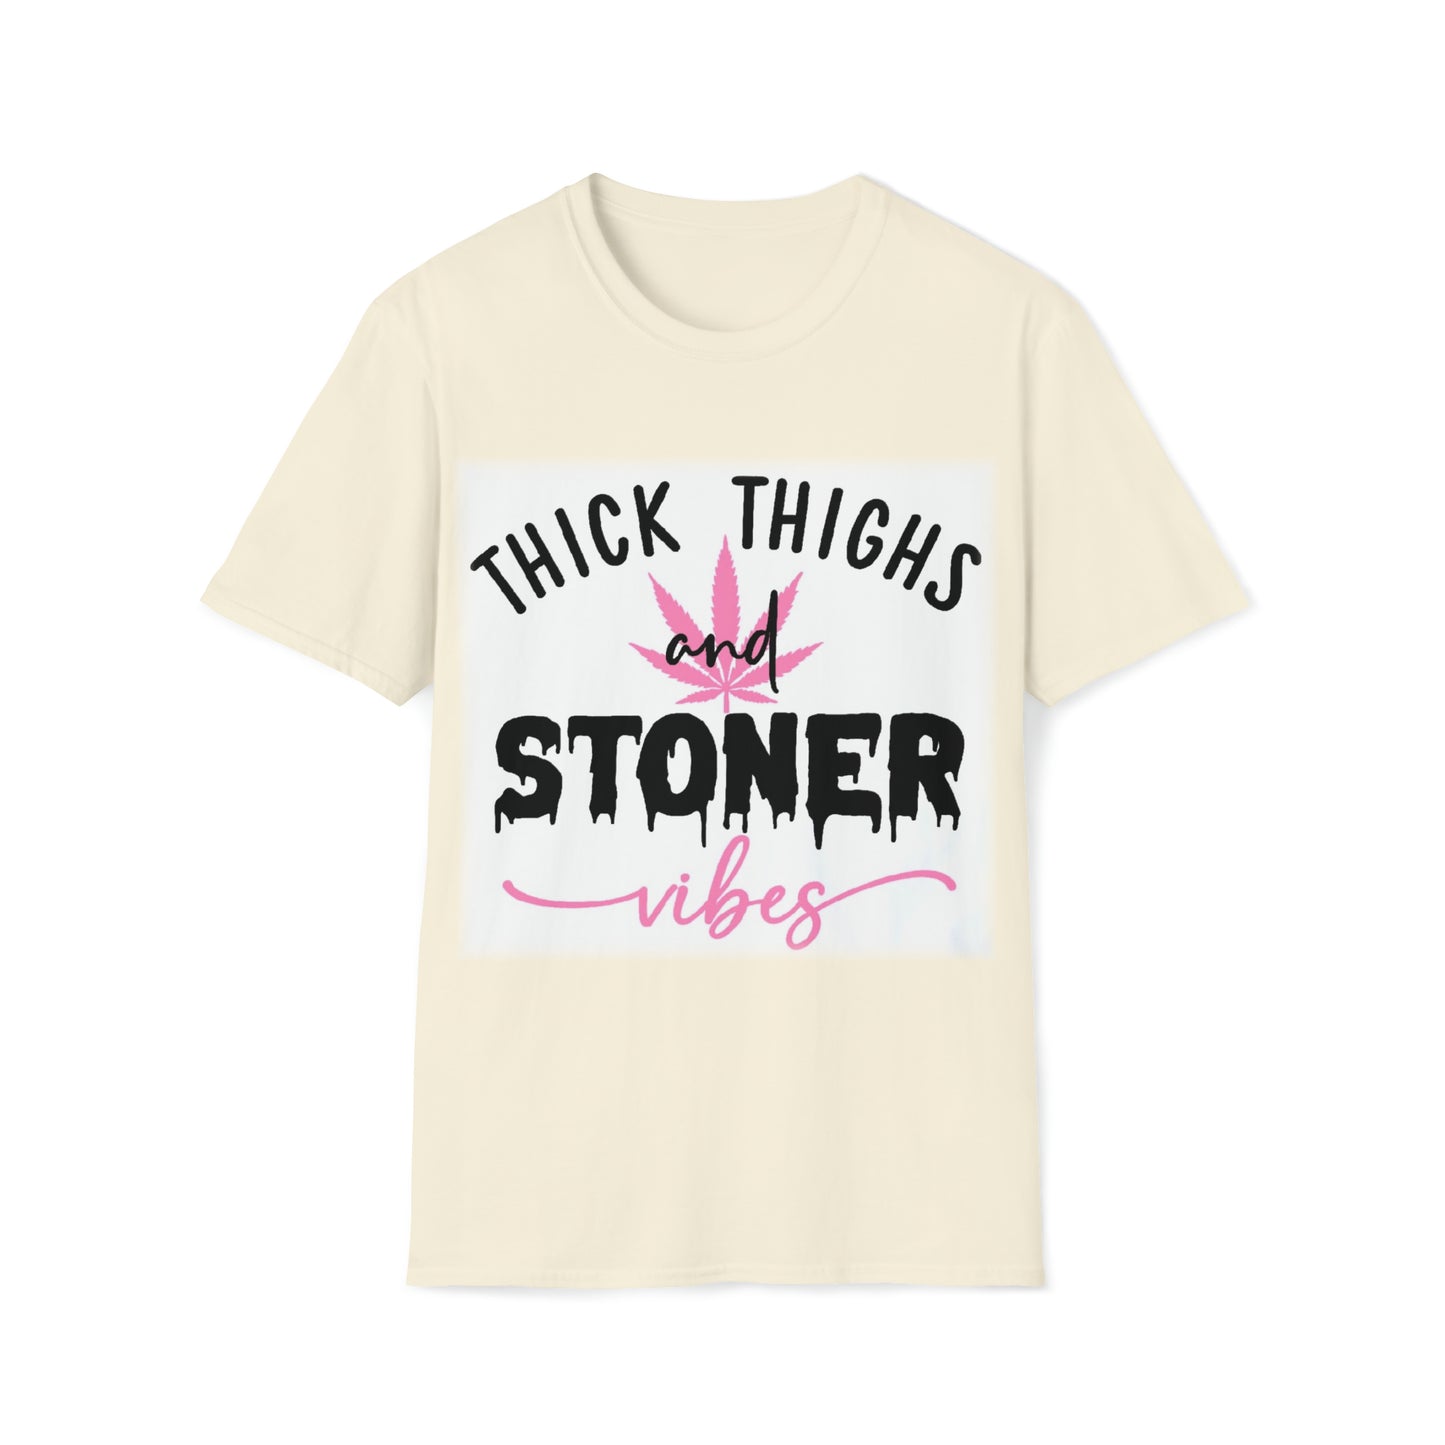 Thighs Vibes Tee